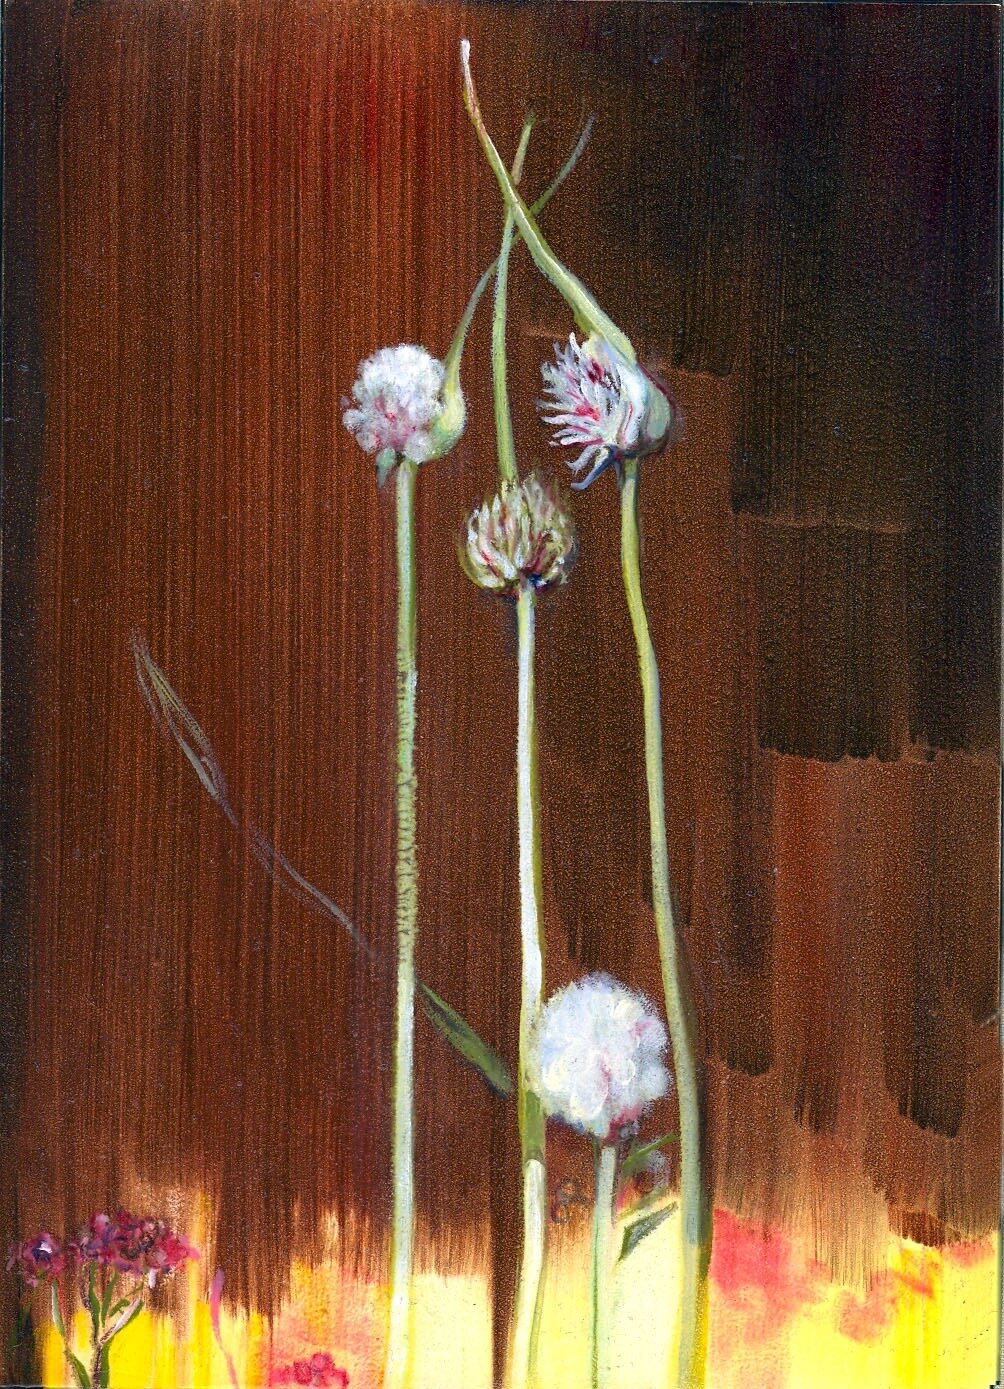   Three and One   oil on panel  5” x 7”  2006 